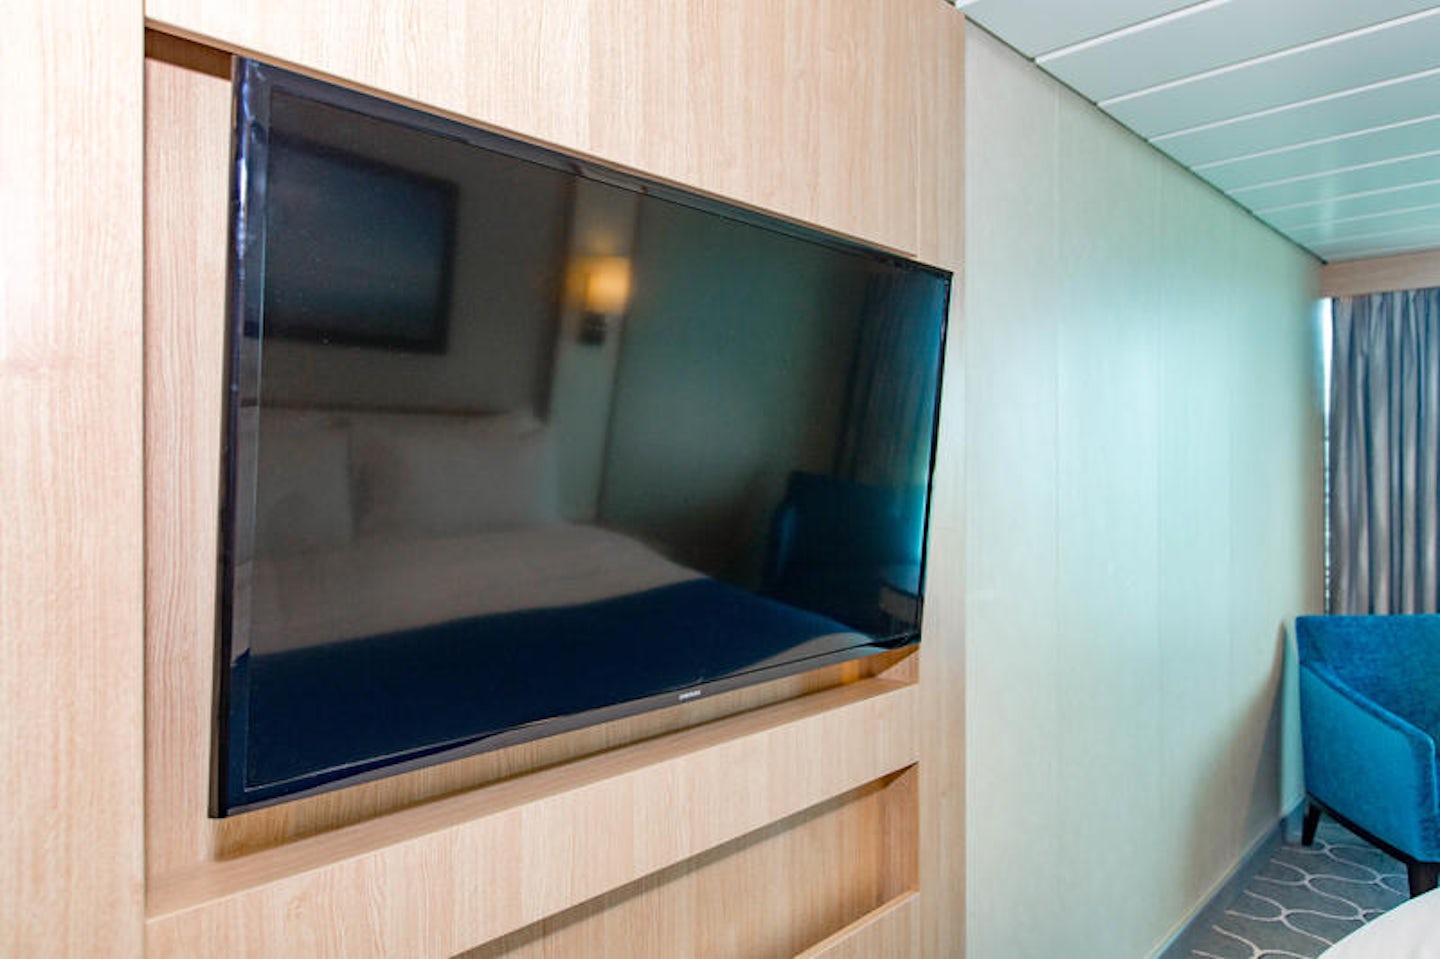 The Spacious Panoramic Ocean-View Cabin on Mariner of the Seas